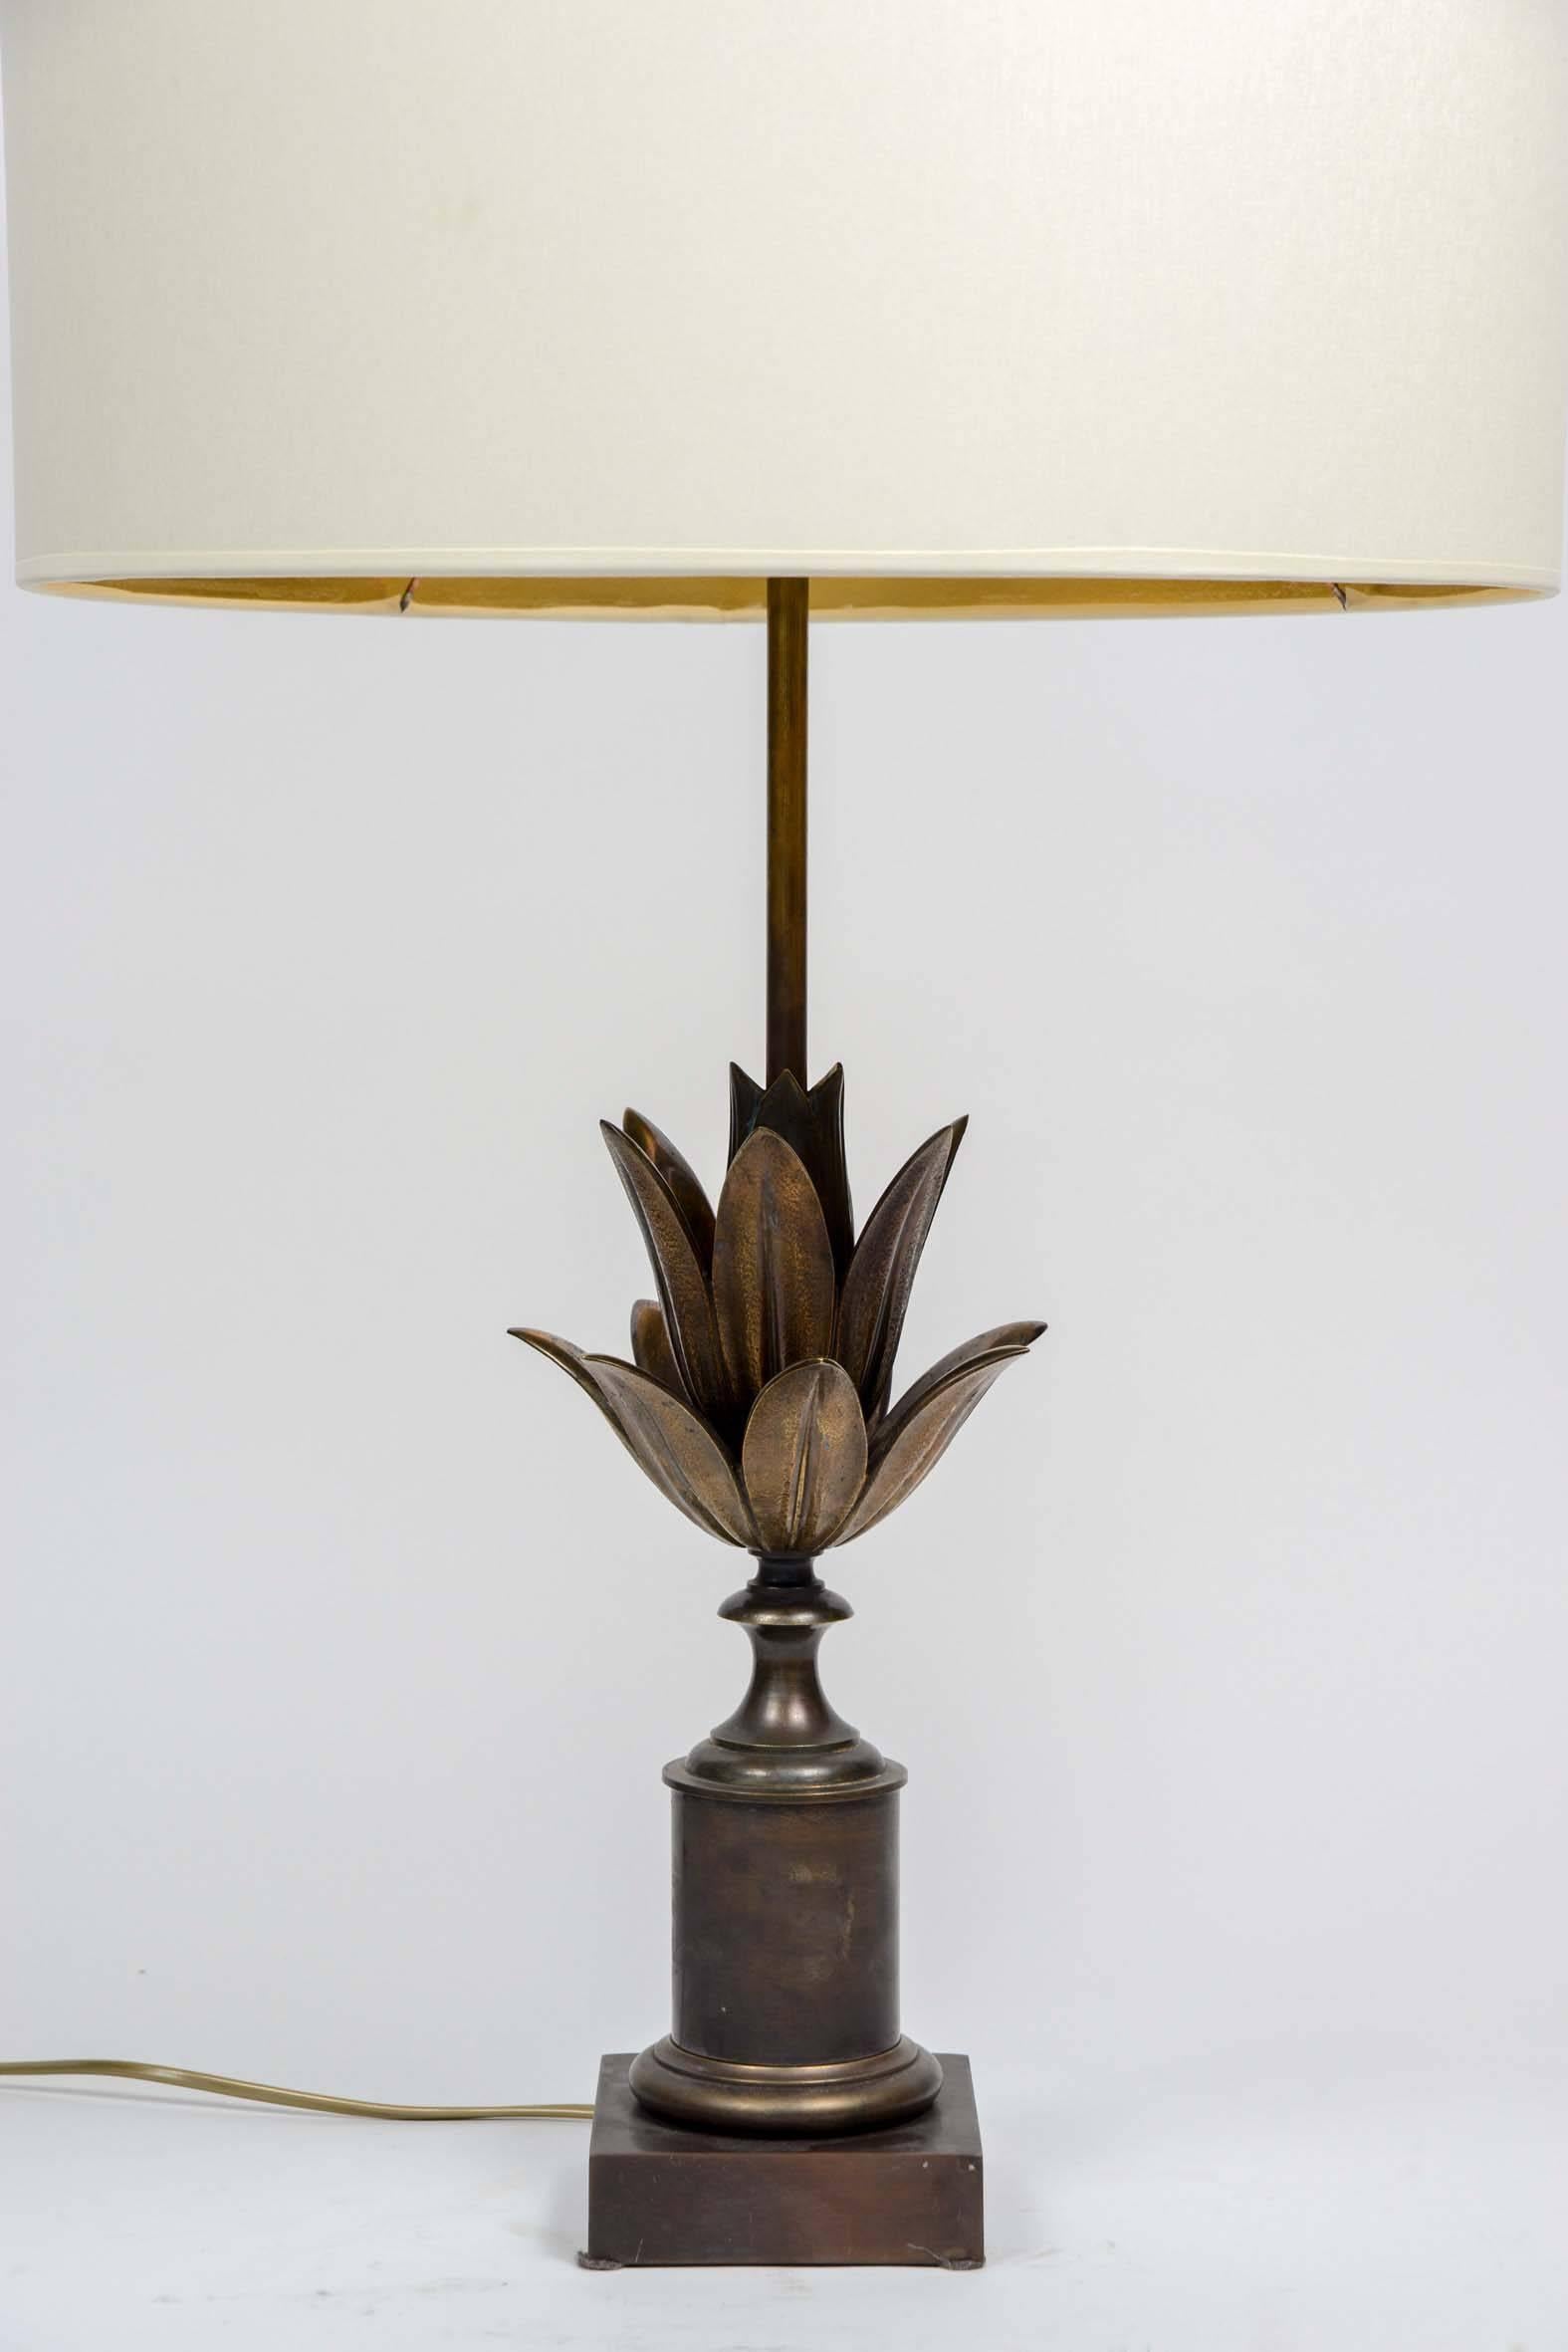 Pair of bronze table lamps by Maison Charles, model 